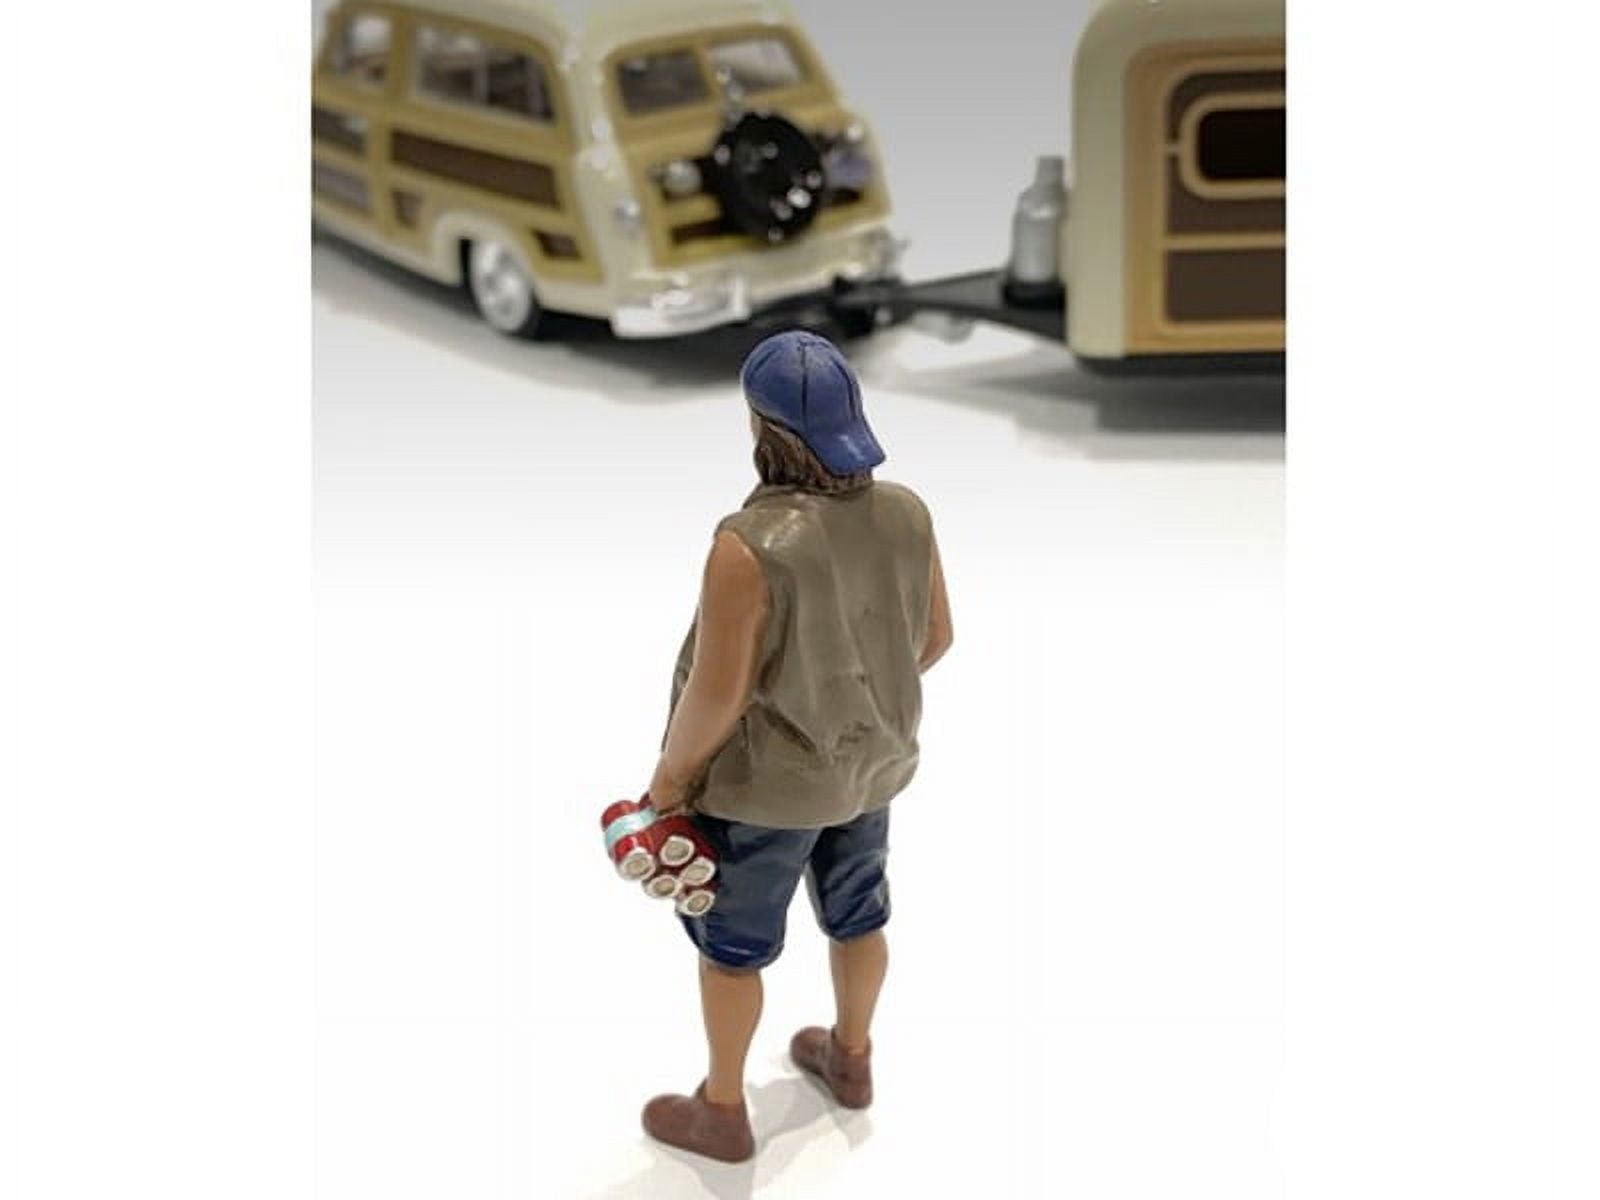 Picture of American Diorama 76335 Campers Figure 2 for 1 by 18 Scale Models